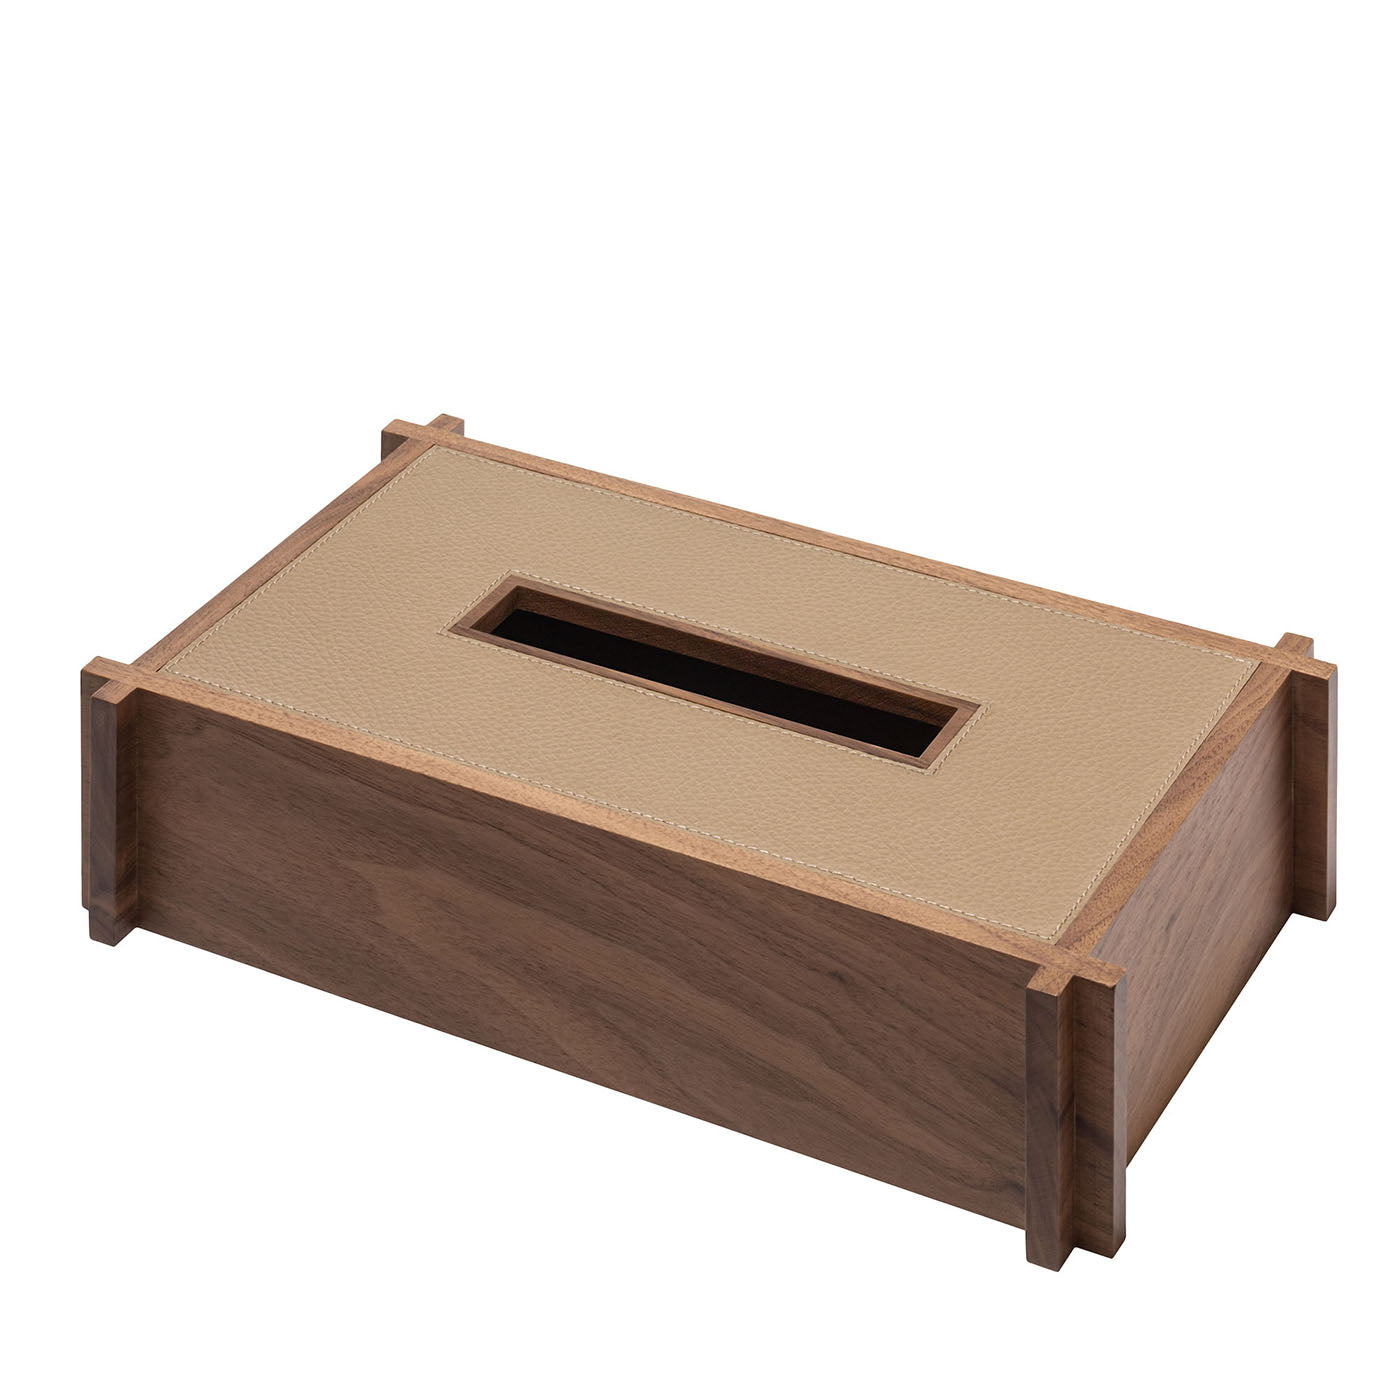 Structura Leather & Wood Rectangular Tissue Holder #2 - Main view